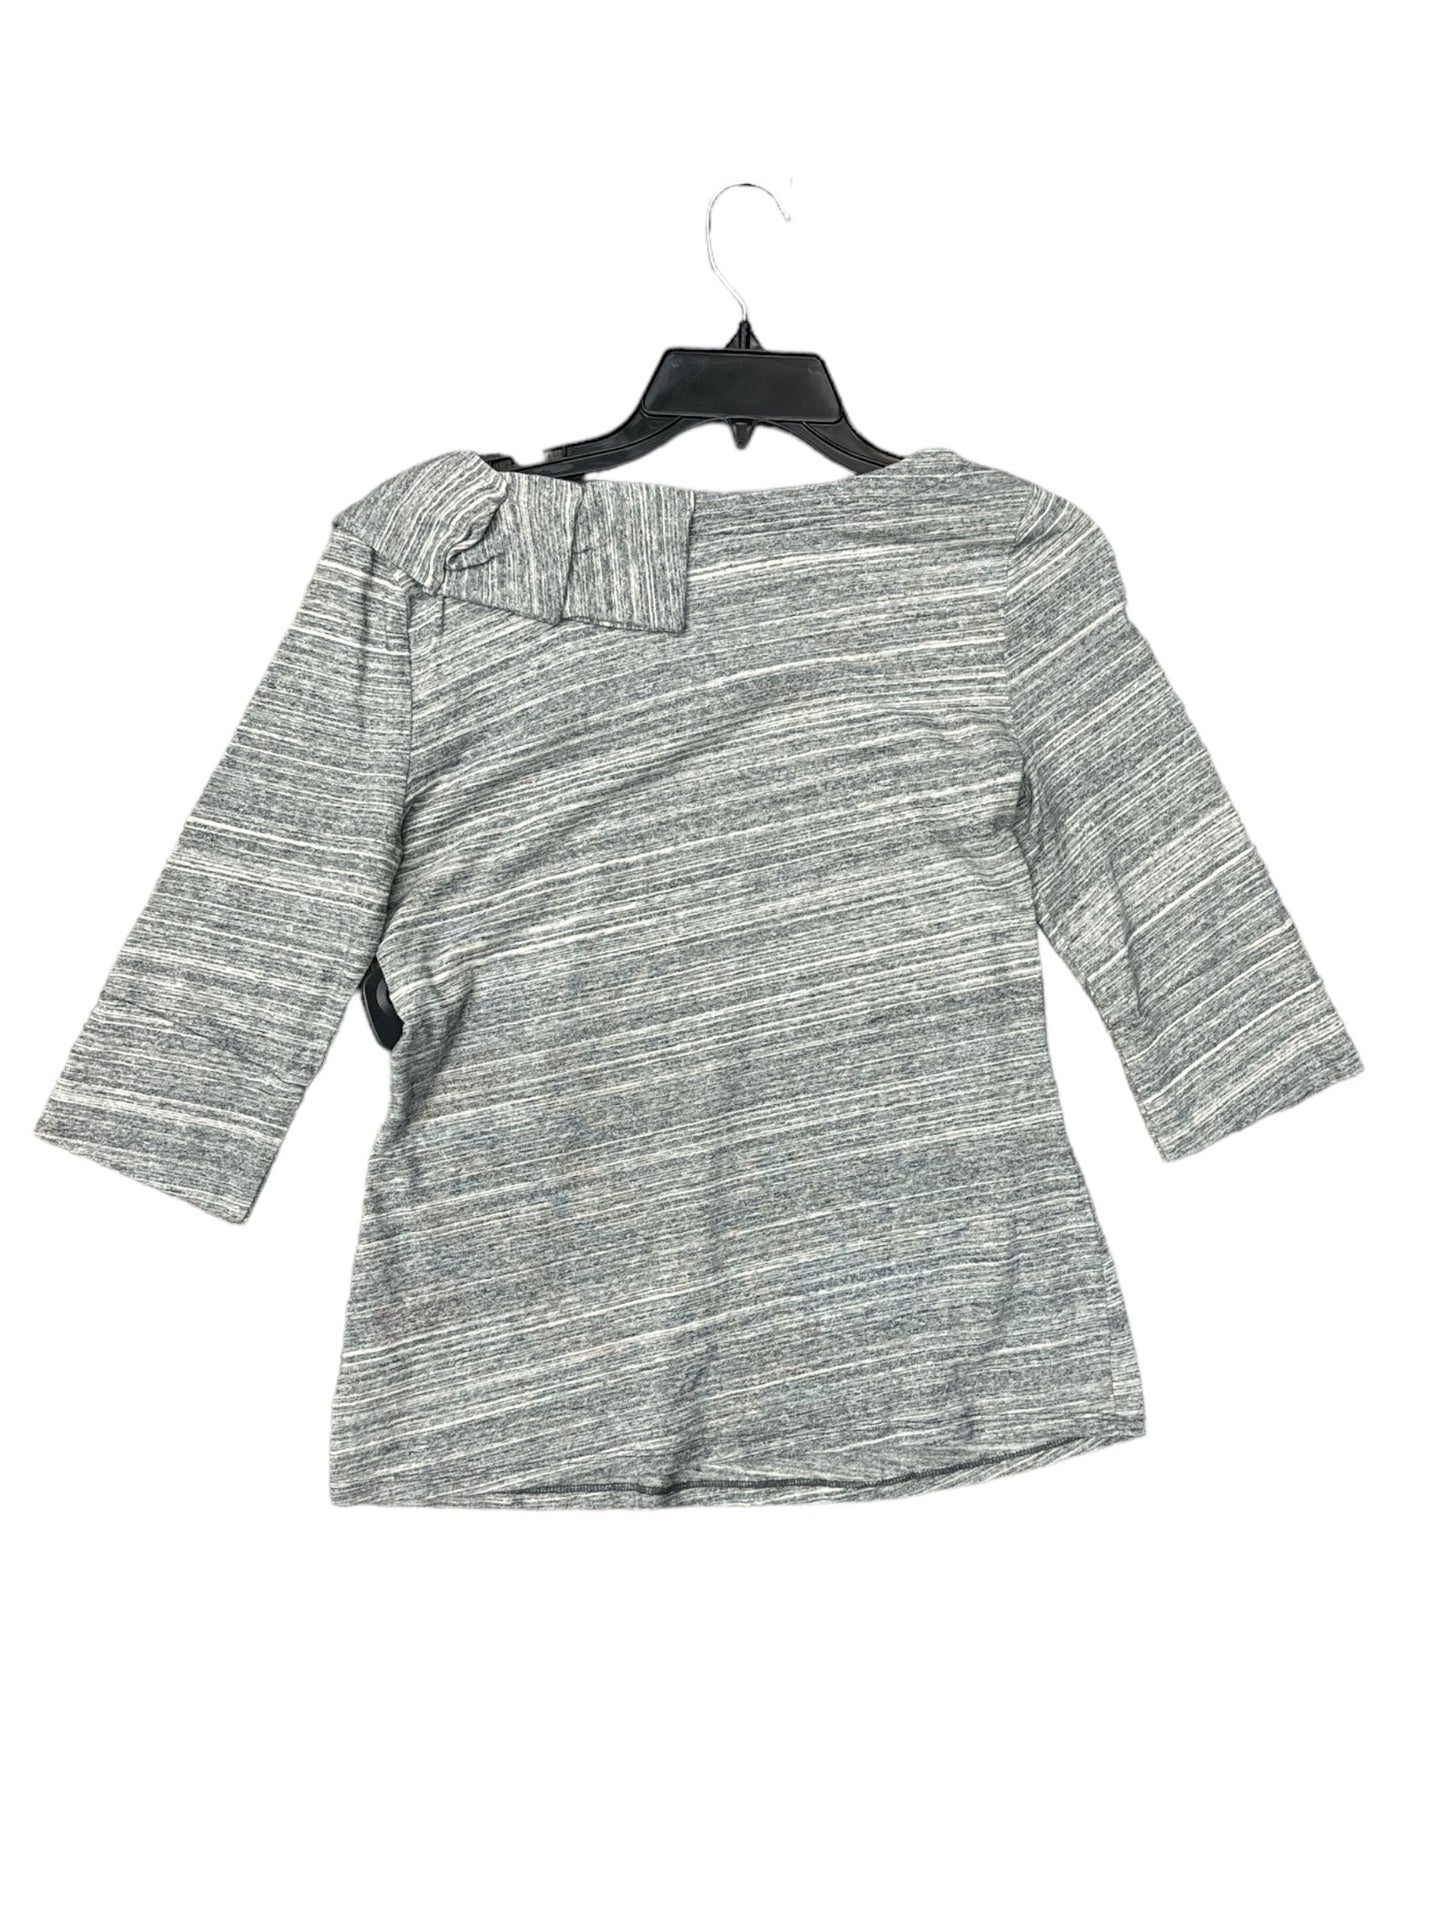 Grey Top 3/4 Sleeve Anthropologie, Size M